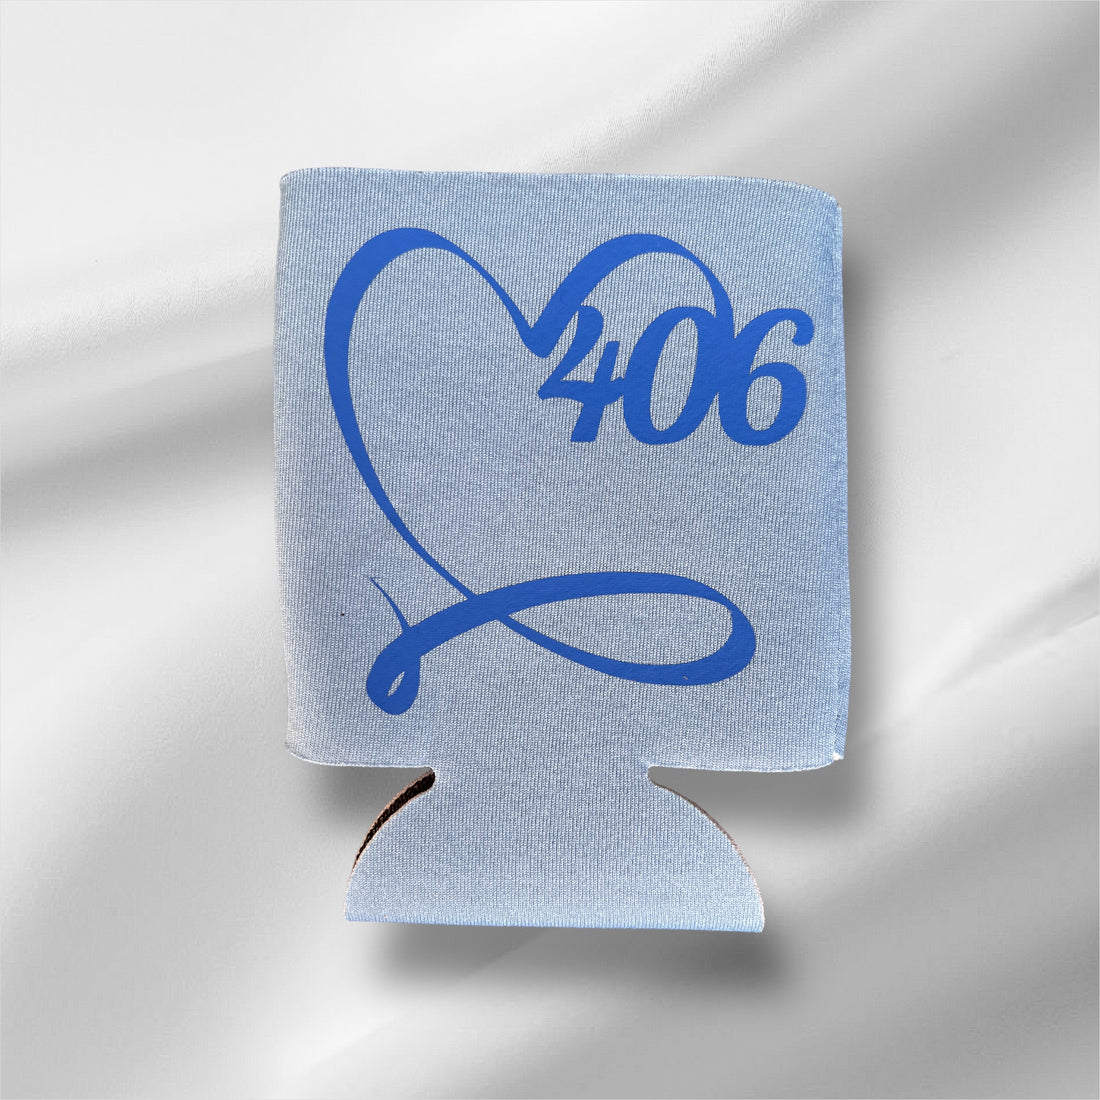 Image of the 406 Love Drink Koozie, showcasing the iconic '406 Love' design, ideal for keeping beverages cool while displaying Montana pride.